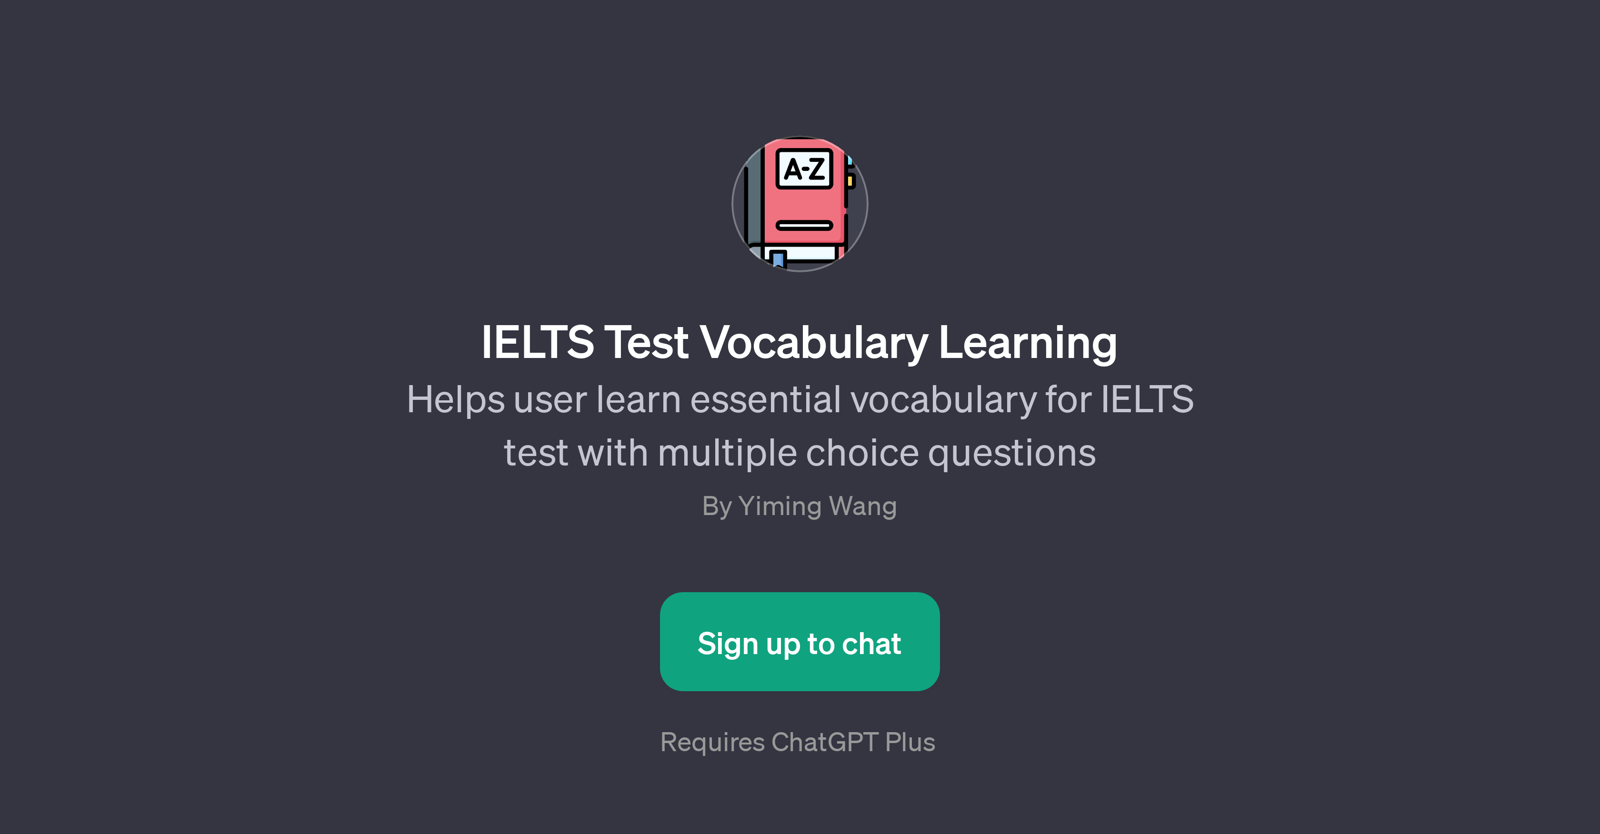 IELTS Test Vocabulary Learning website